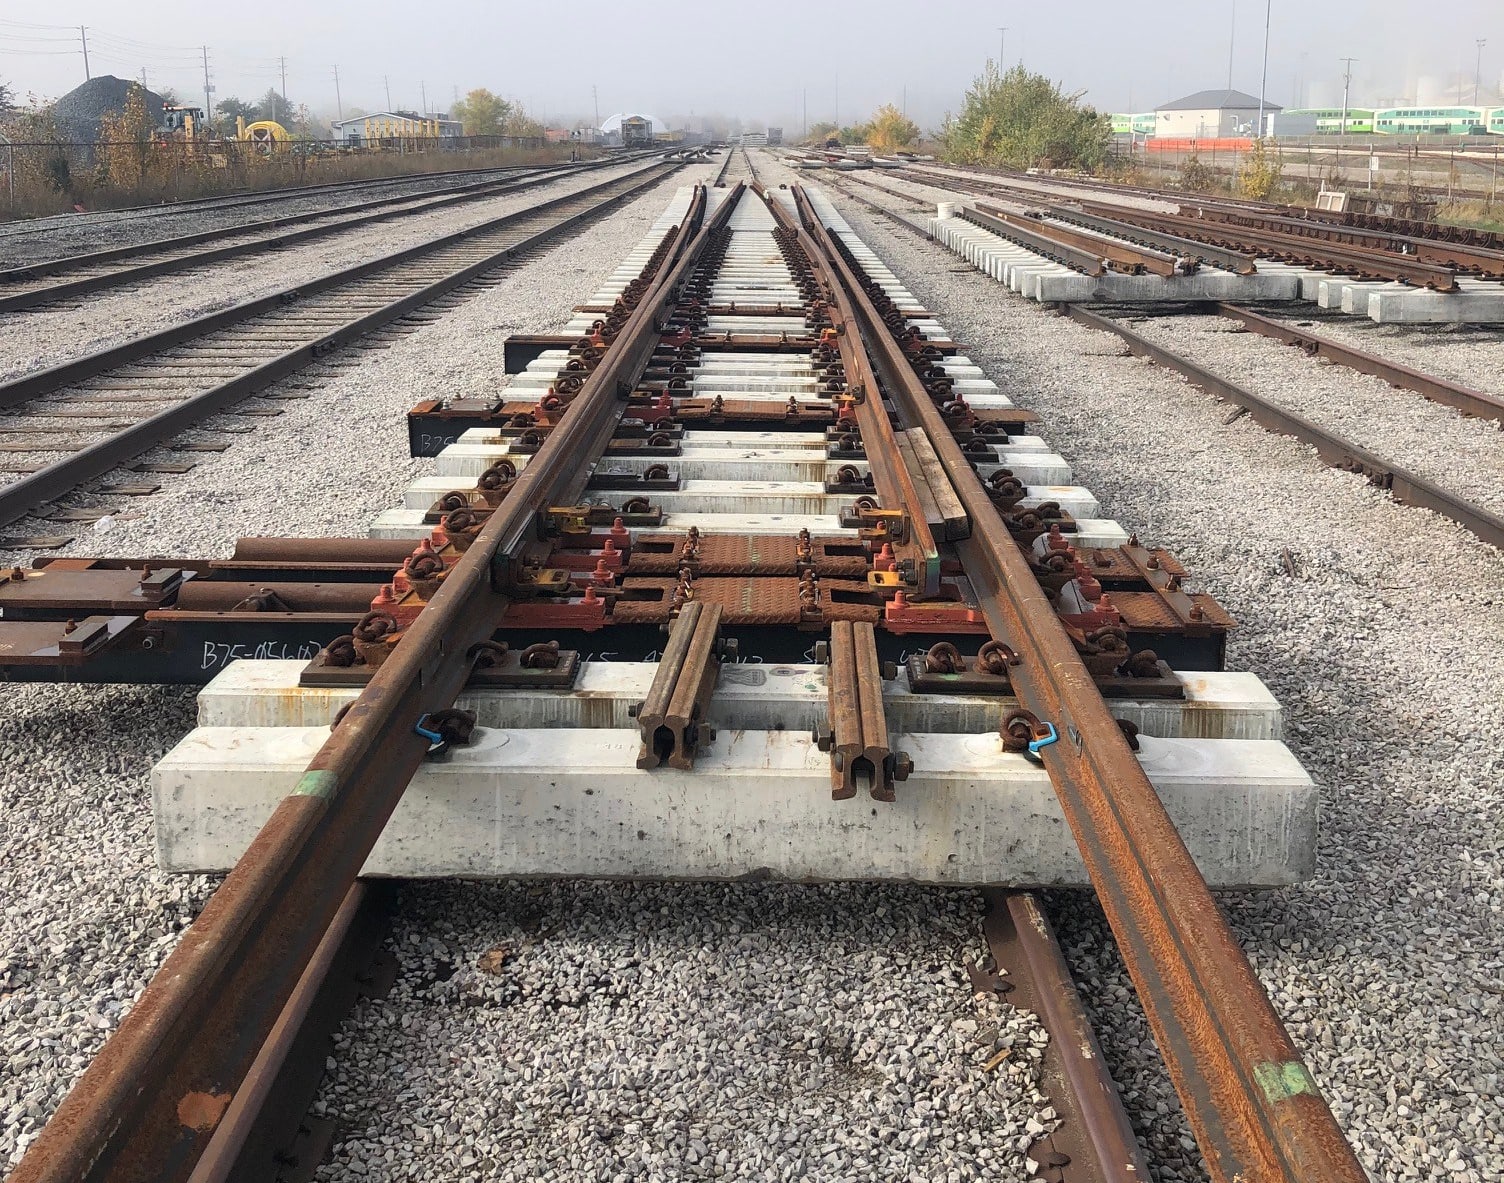 The new switch plant with concrete rail ties sits in the nearby rail yard waiting to be installed.